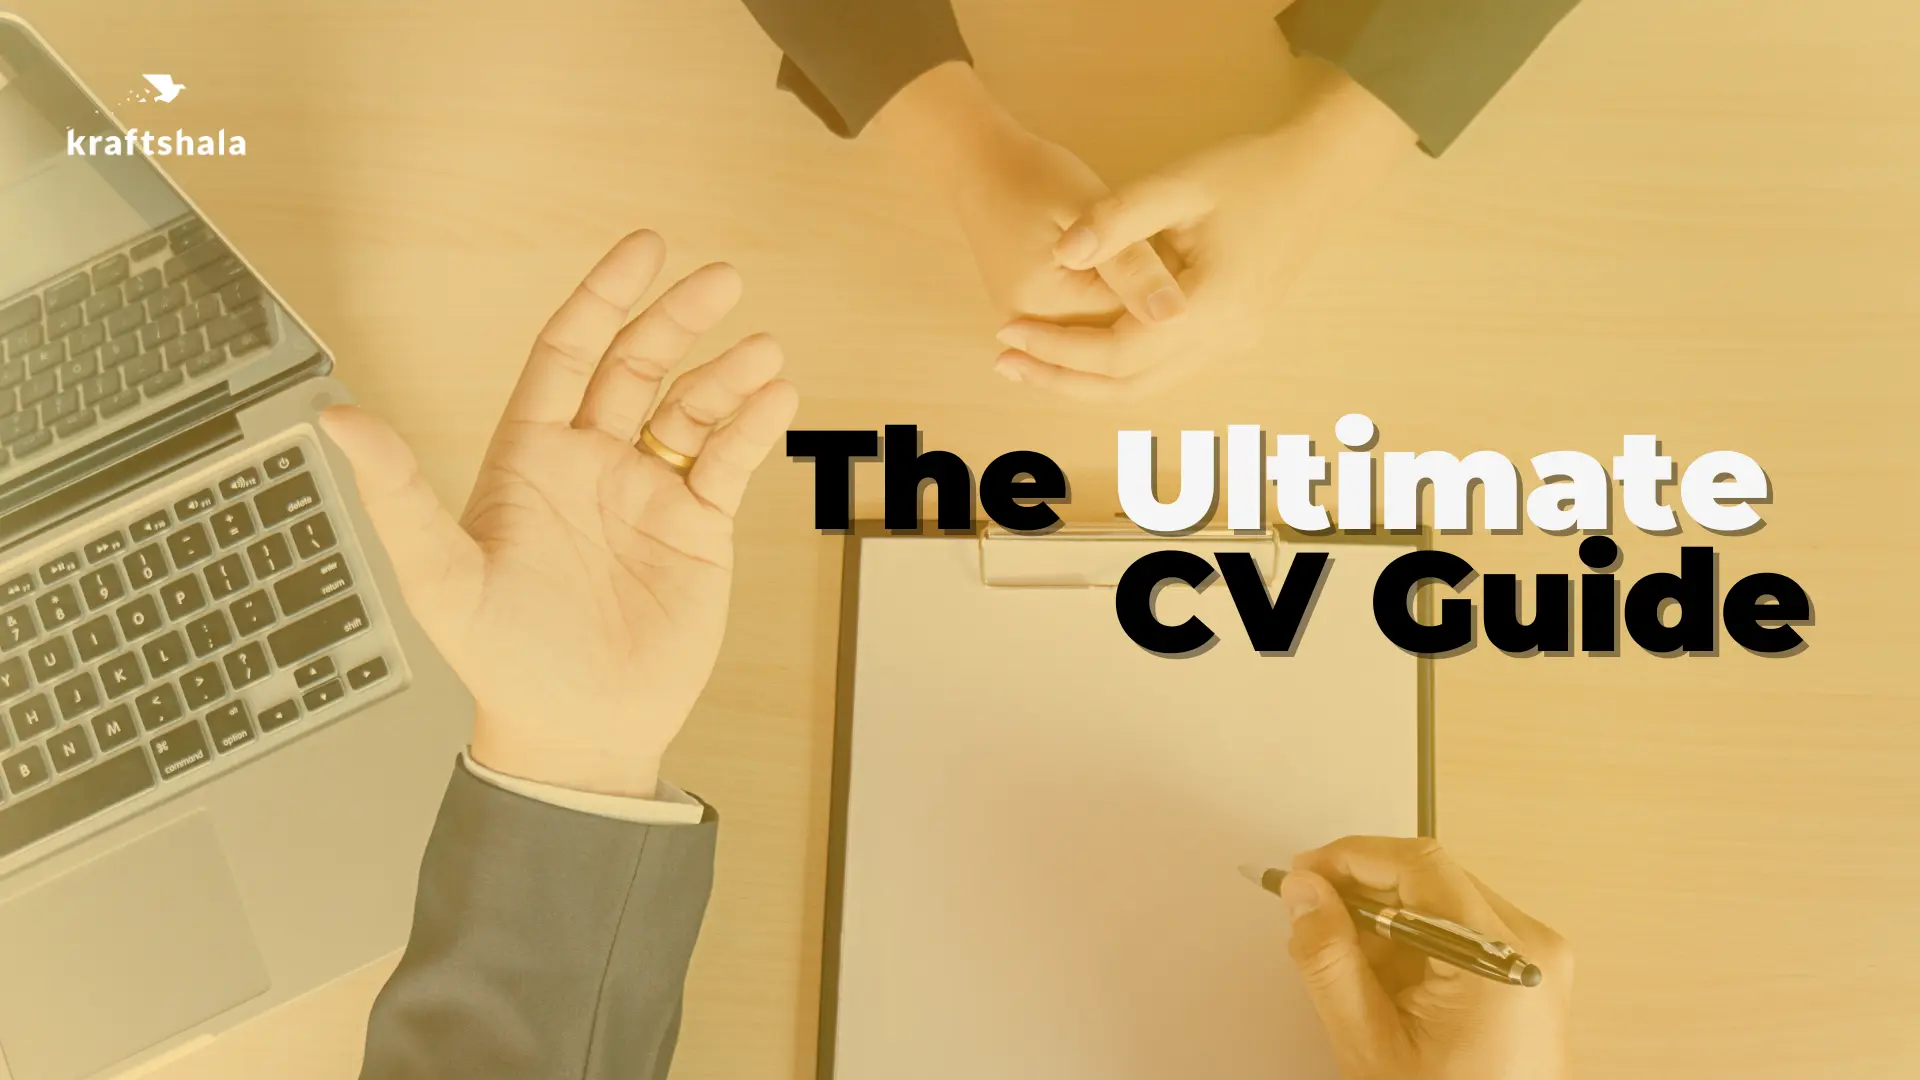 How to Make a CV – Ultimate CV Guide for Experienced Folks